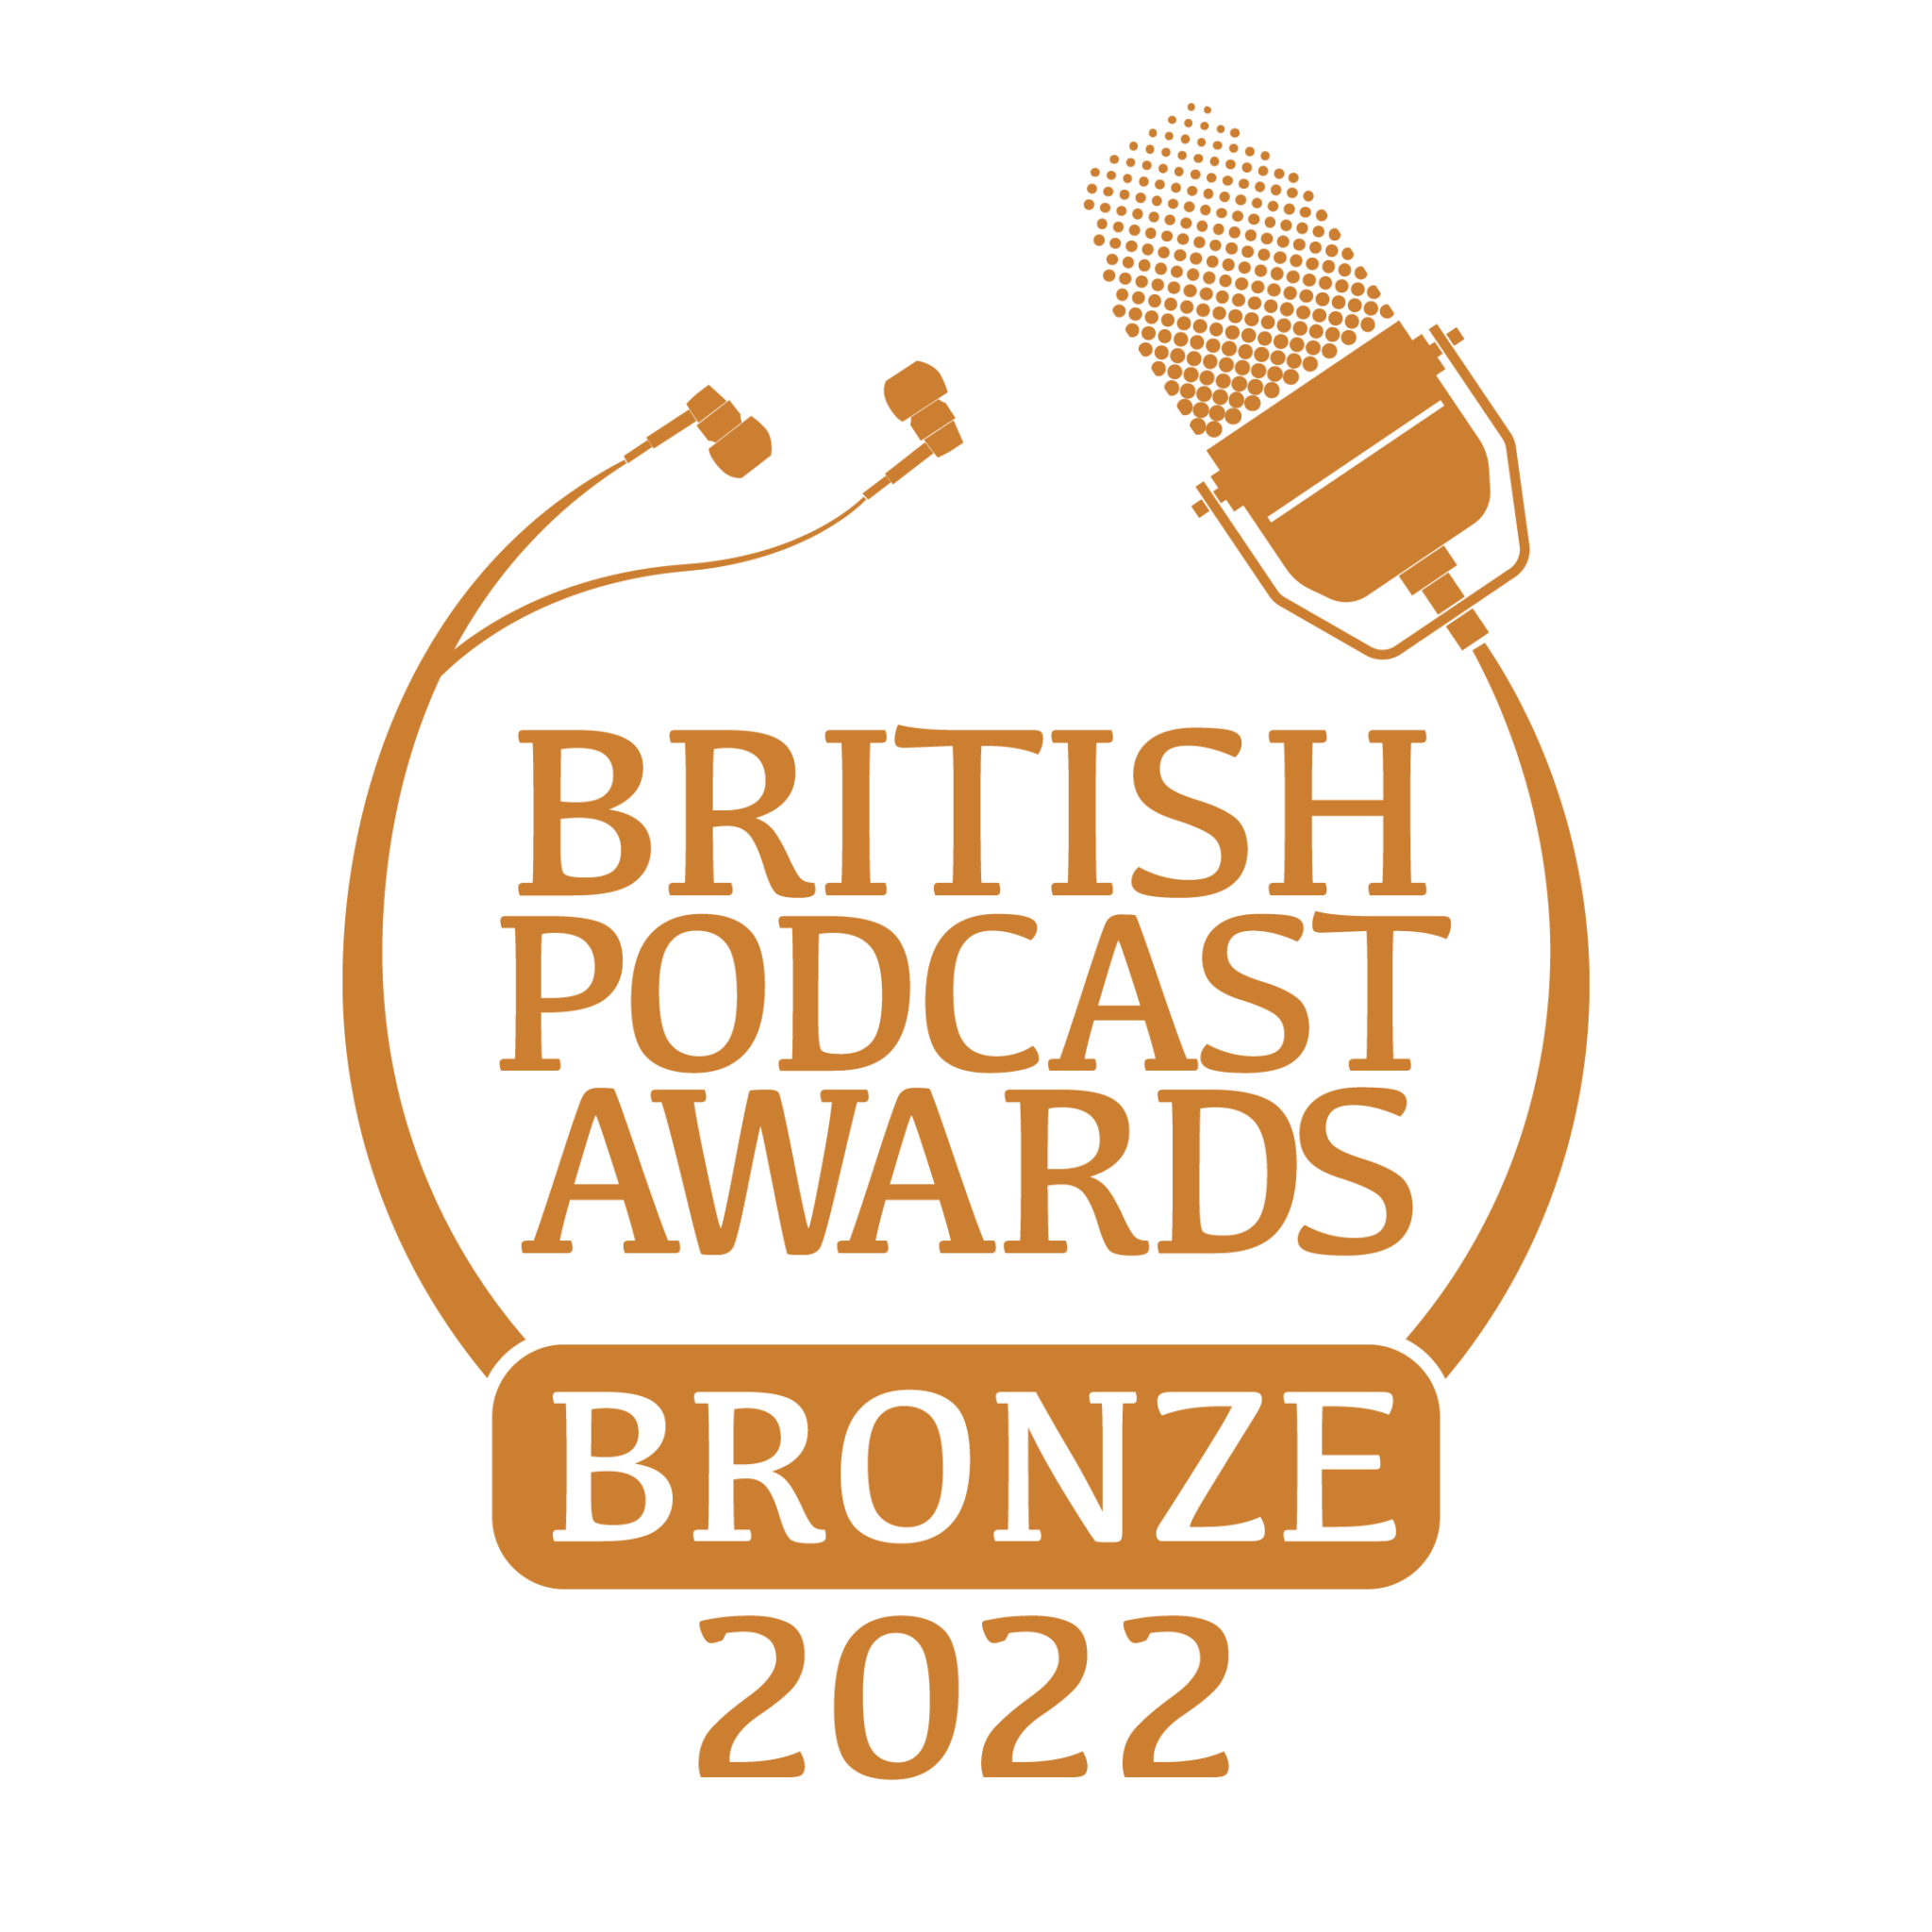 British Podcast Awards 2022 We're winners! made by mortals